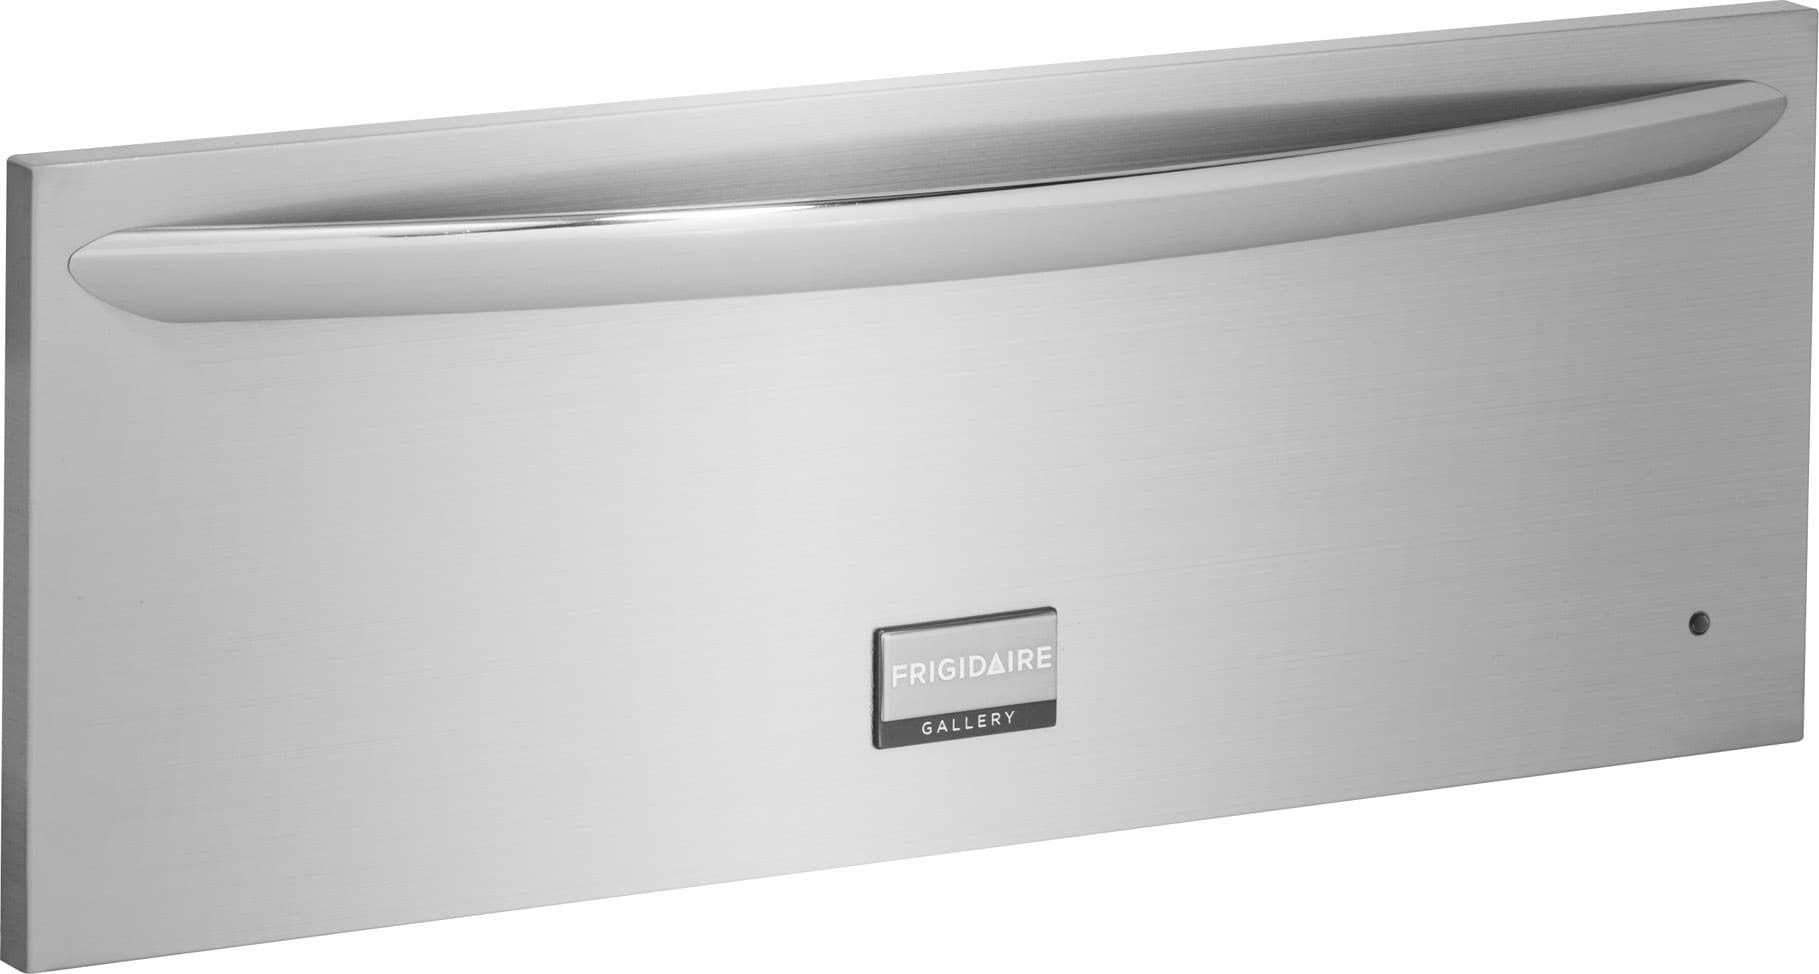 Frigidaire Gallery Warming Drawer 30in; Actual 30in) at